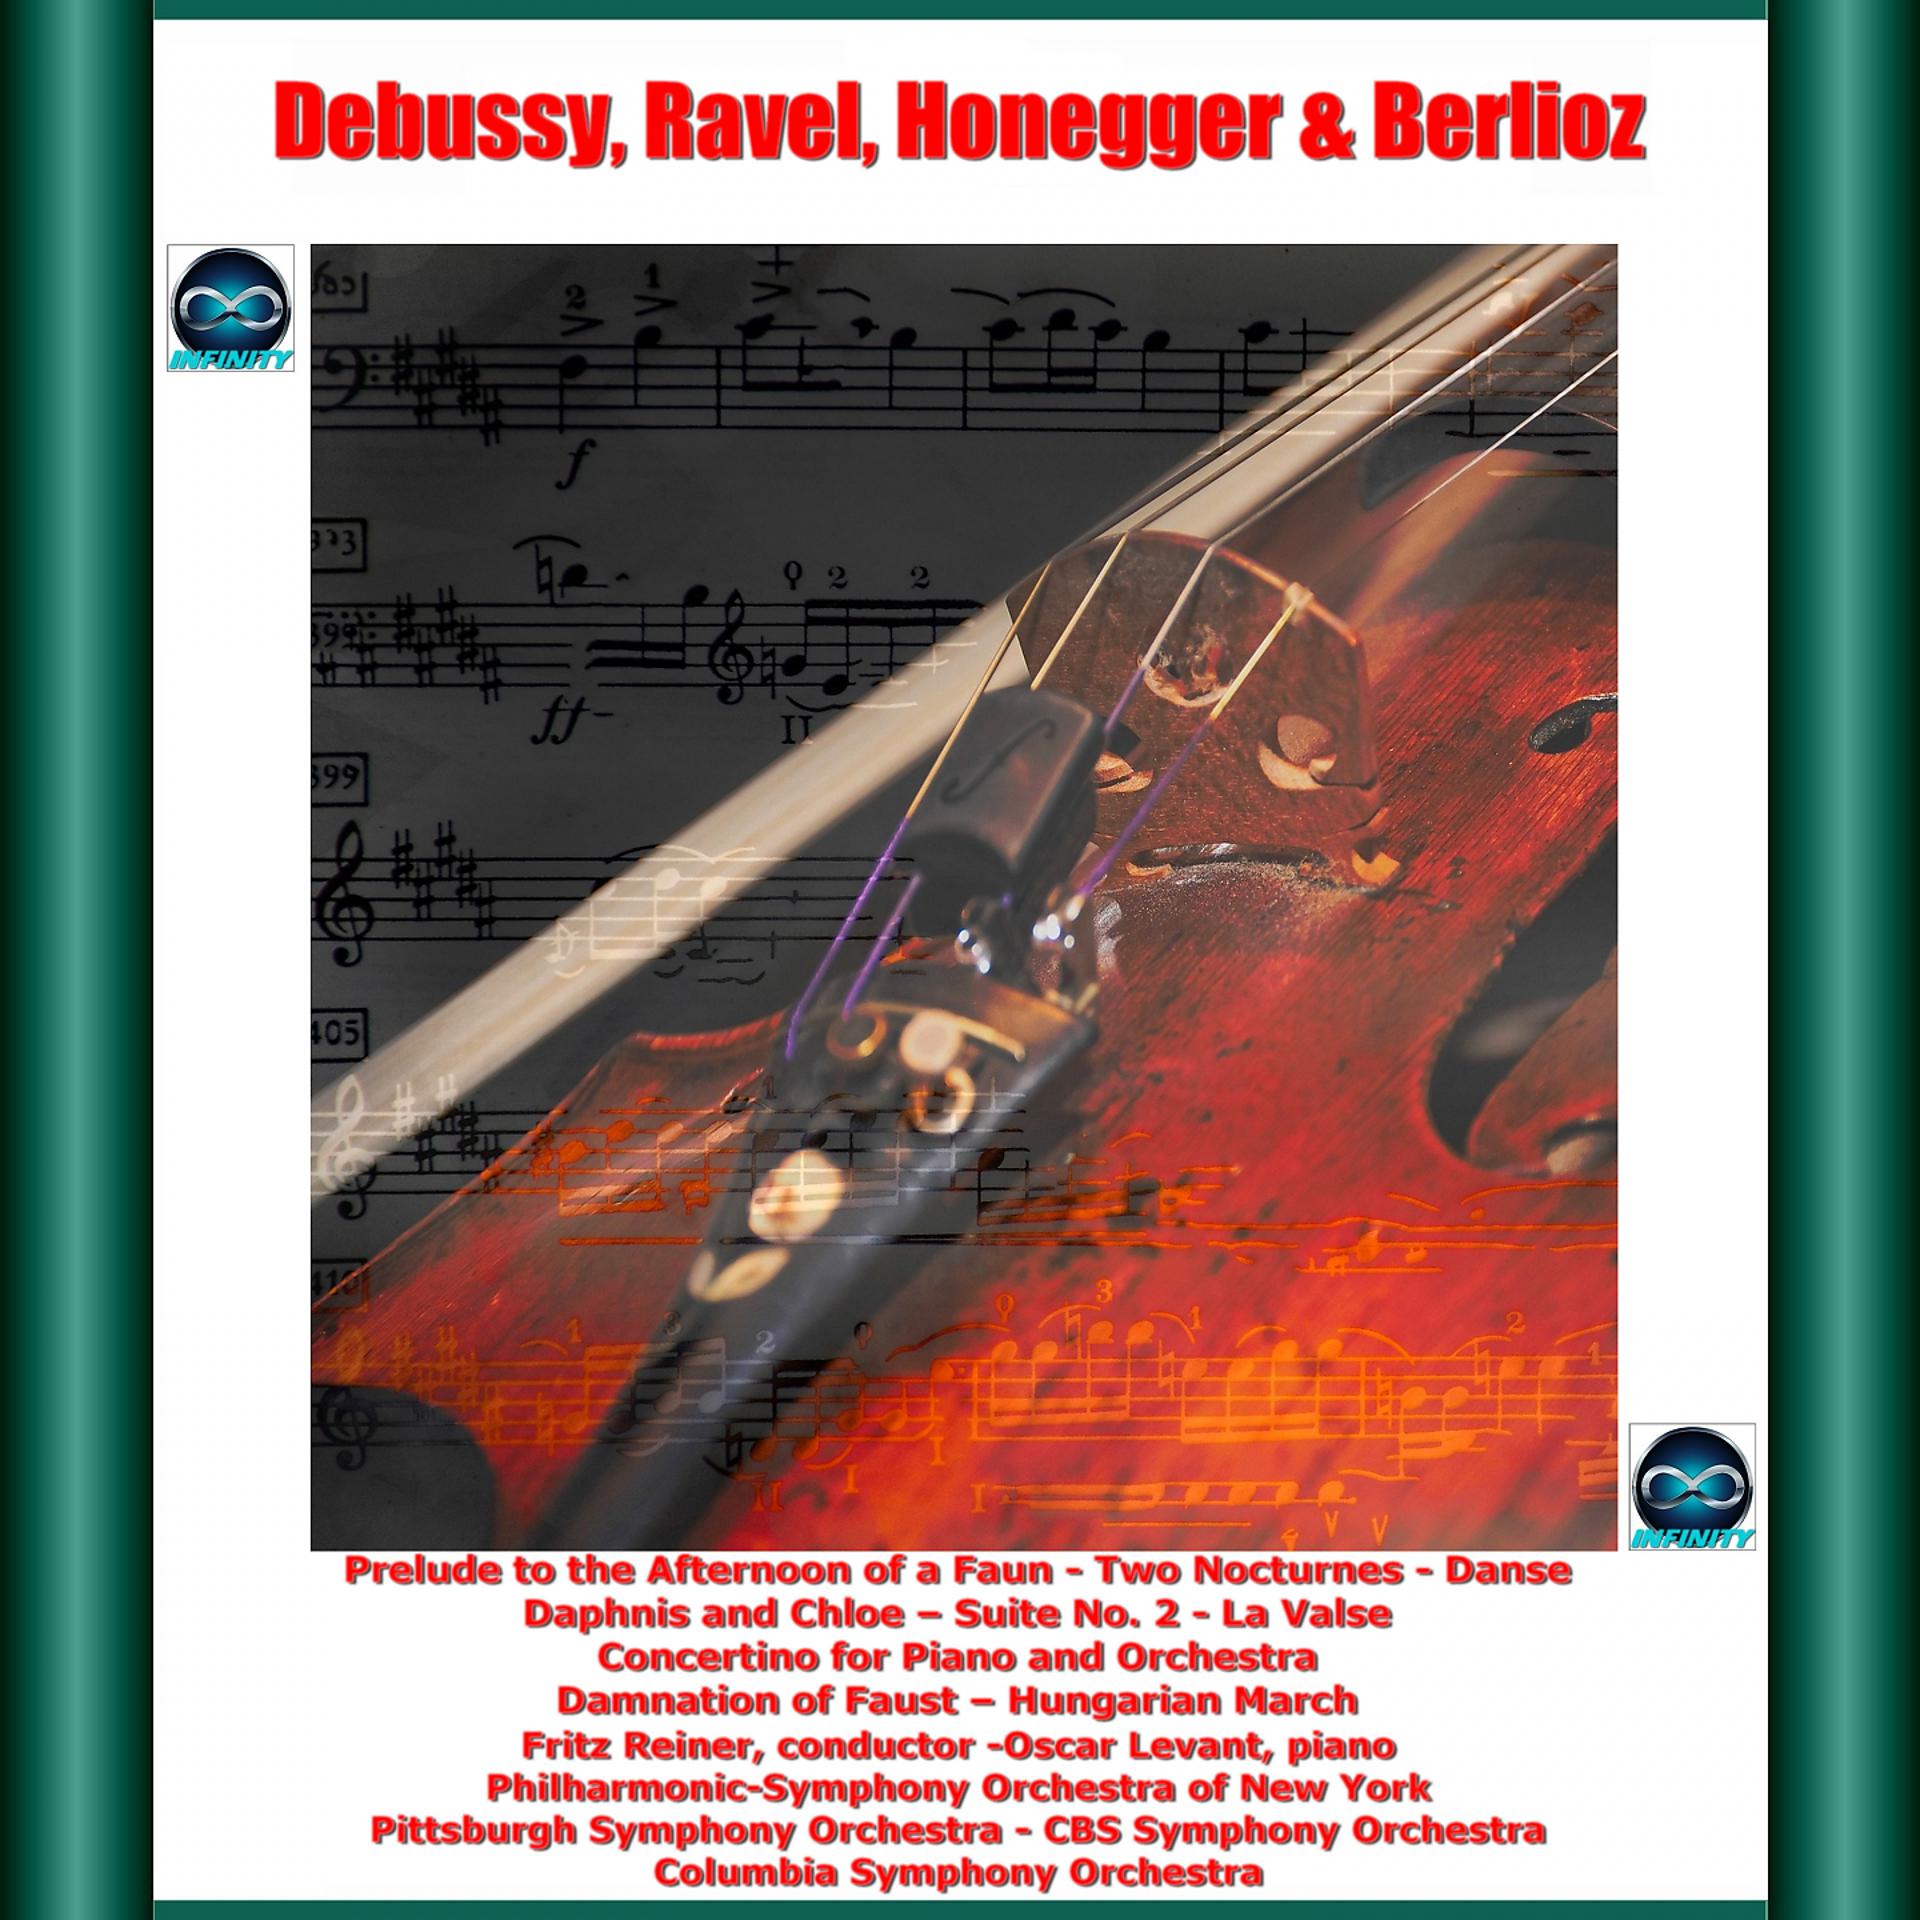 Постер альбома Debussy, ravel, honegger & berlioz : prelude to the afternoon of a faun - two nocturnes - danse daphnis and chlœ, suite no. 2 - la valse - concertino for piano and orchestra - damnation of faust - hungarian march